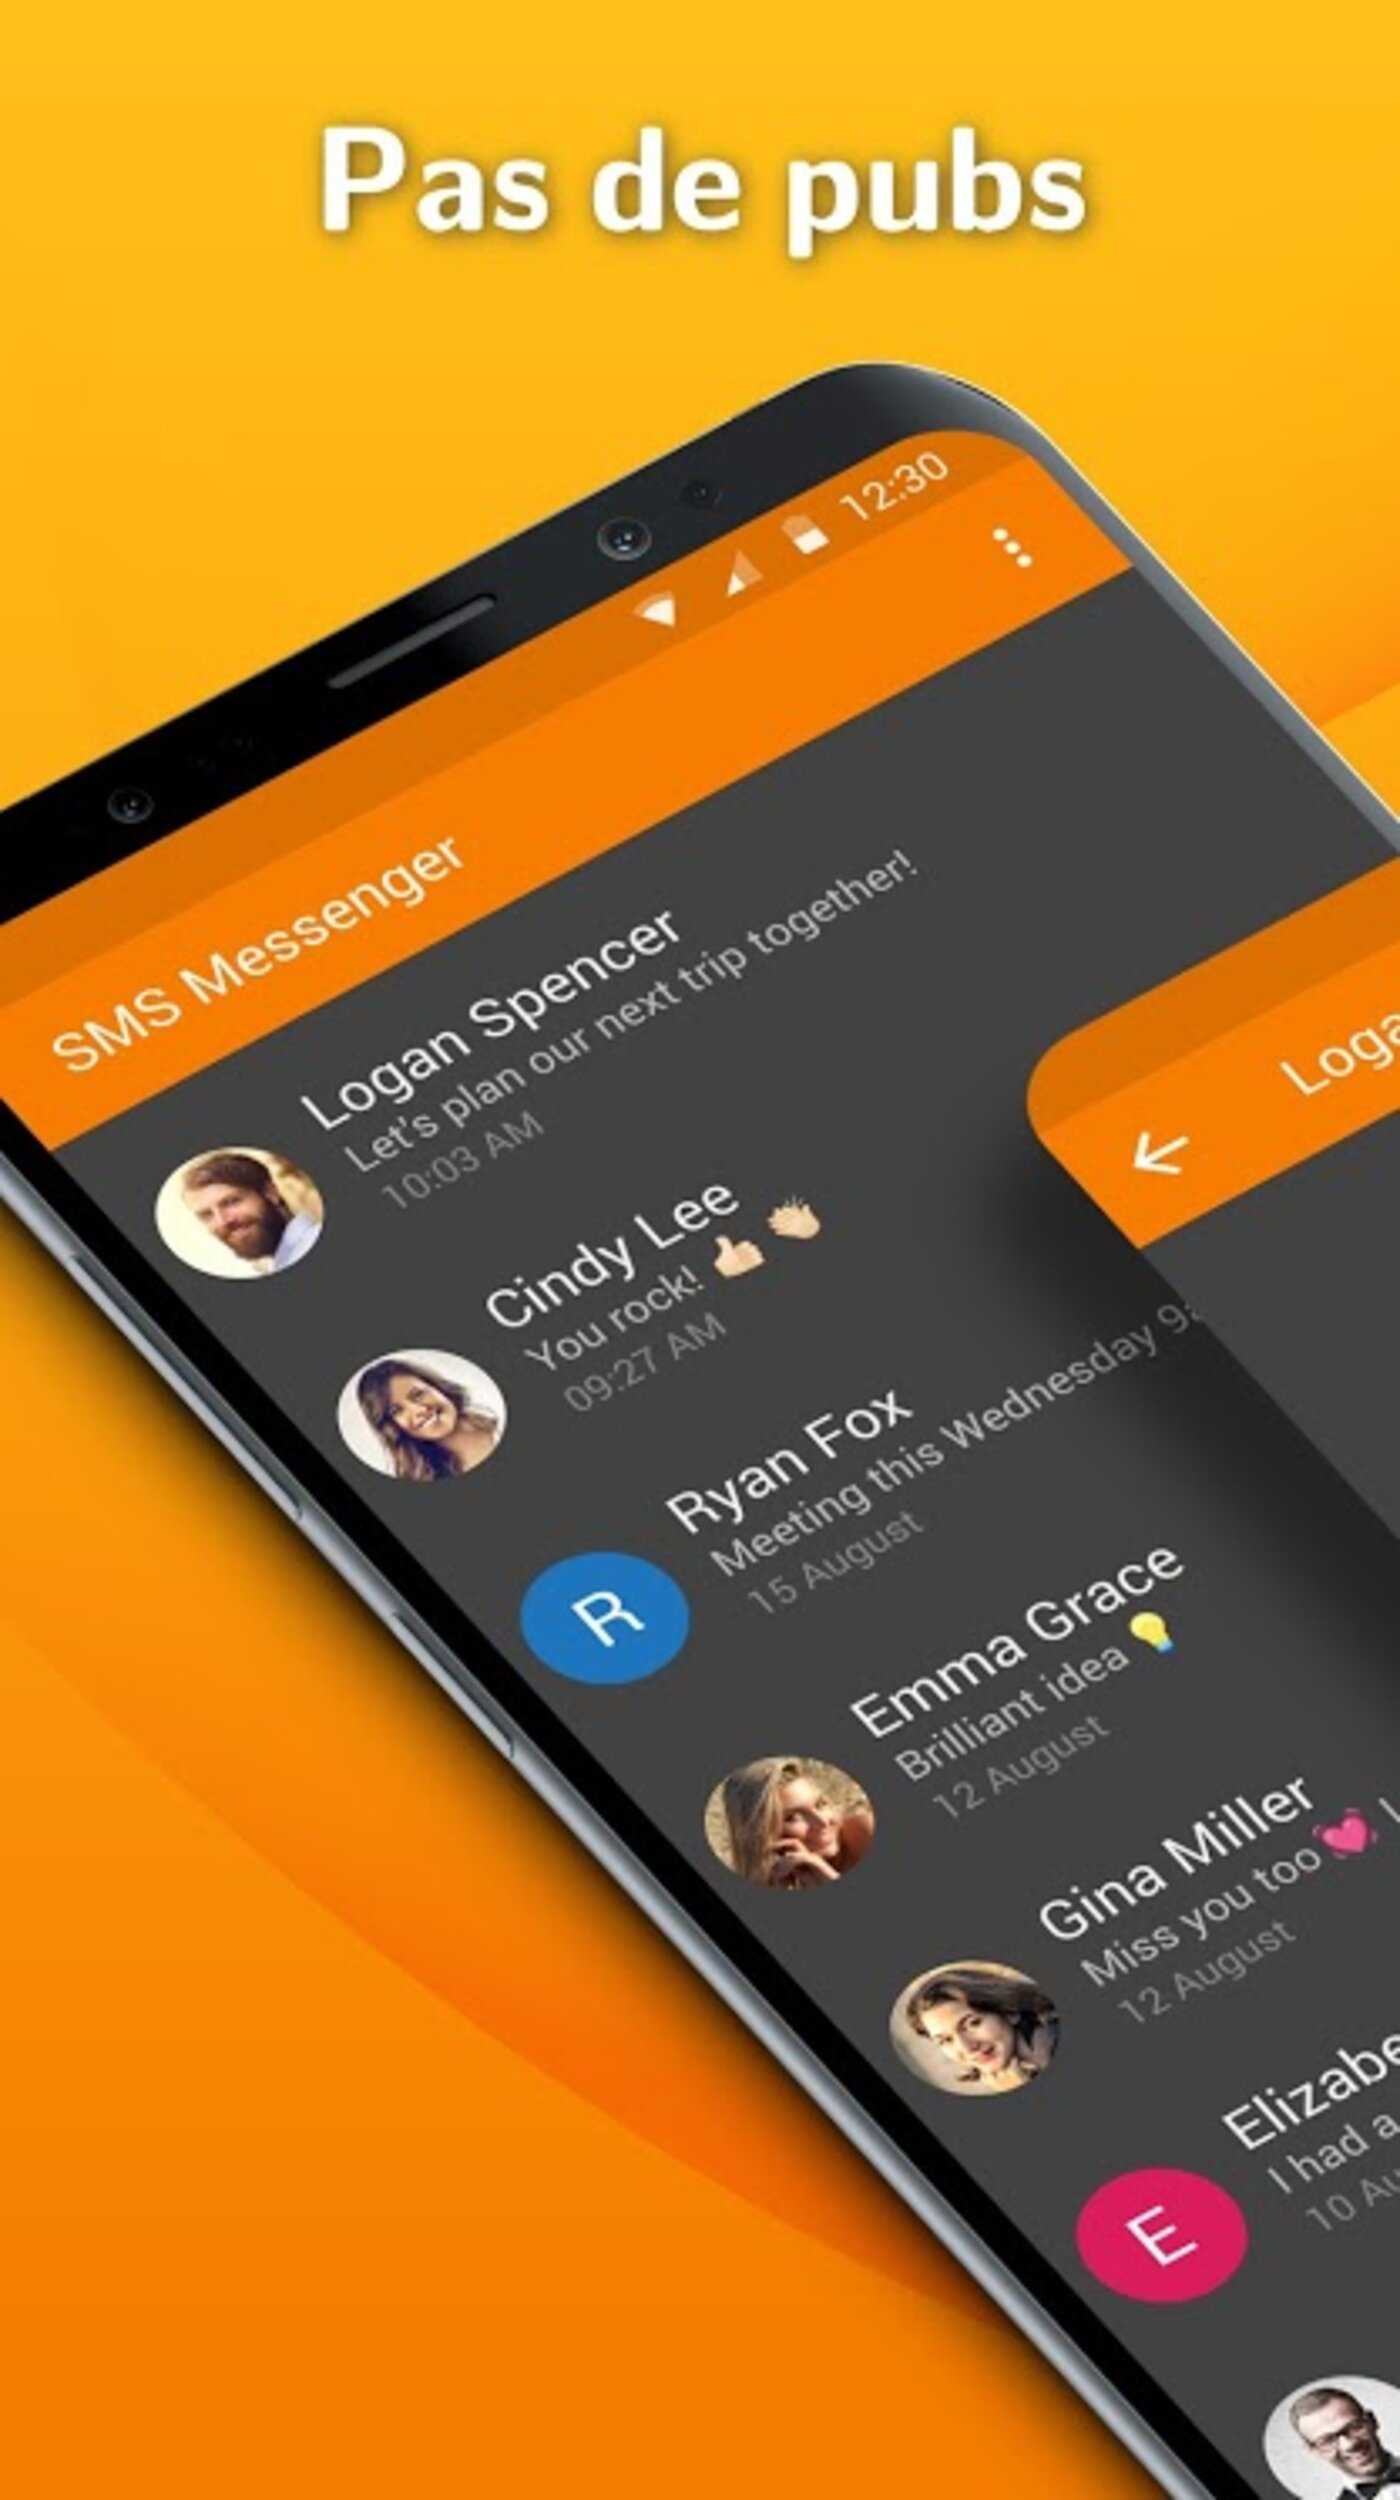 Simple SMS Messenger – Send SMS messages quickly v5.10.2 (Unlocked) (Mod) APK